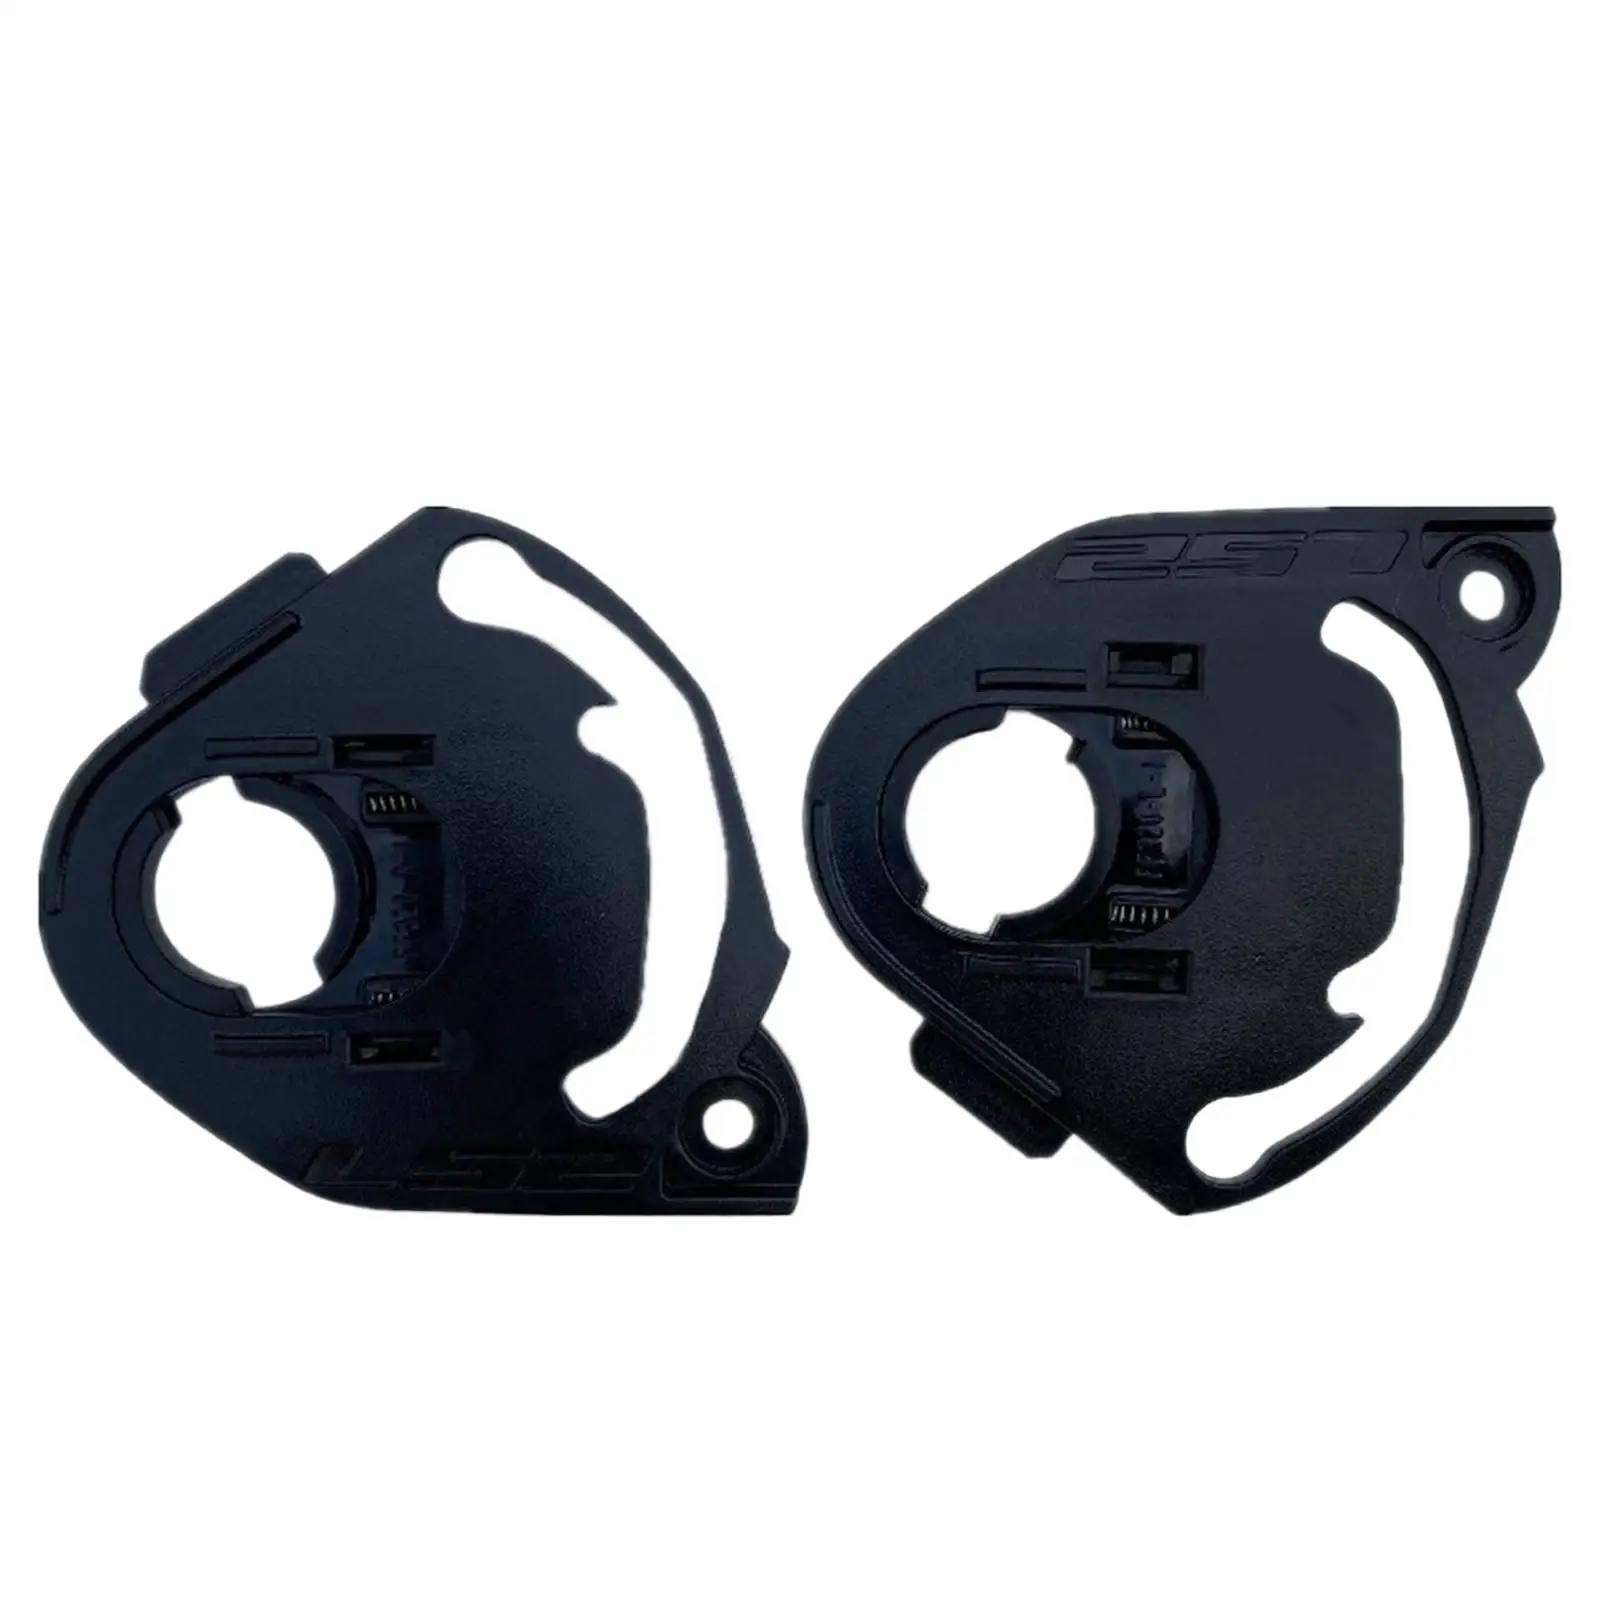 2x Motorcycles  Lens Base, Replace   Visor Mounts, for Ff353 Ff800 320 328 353.